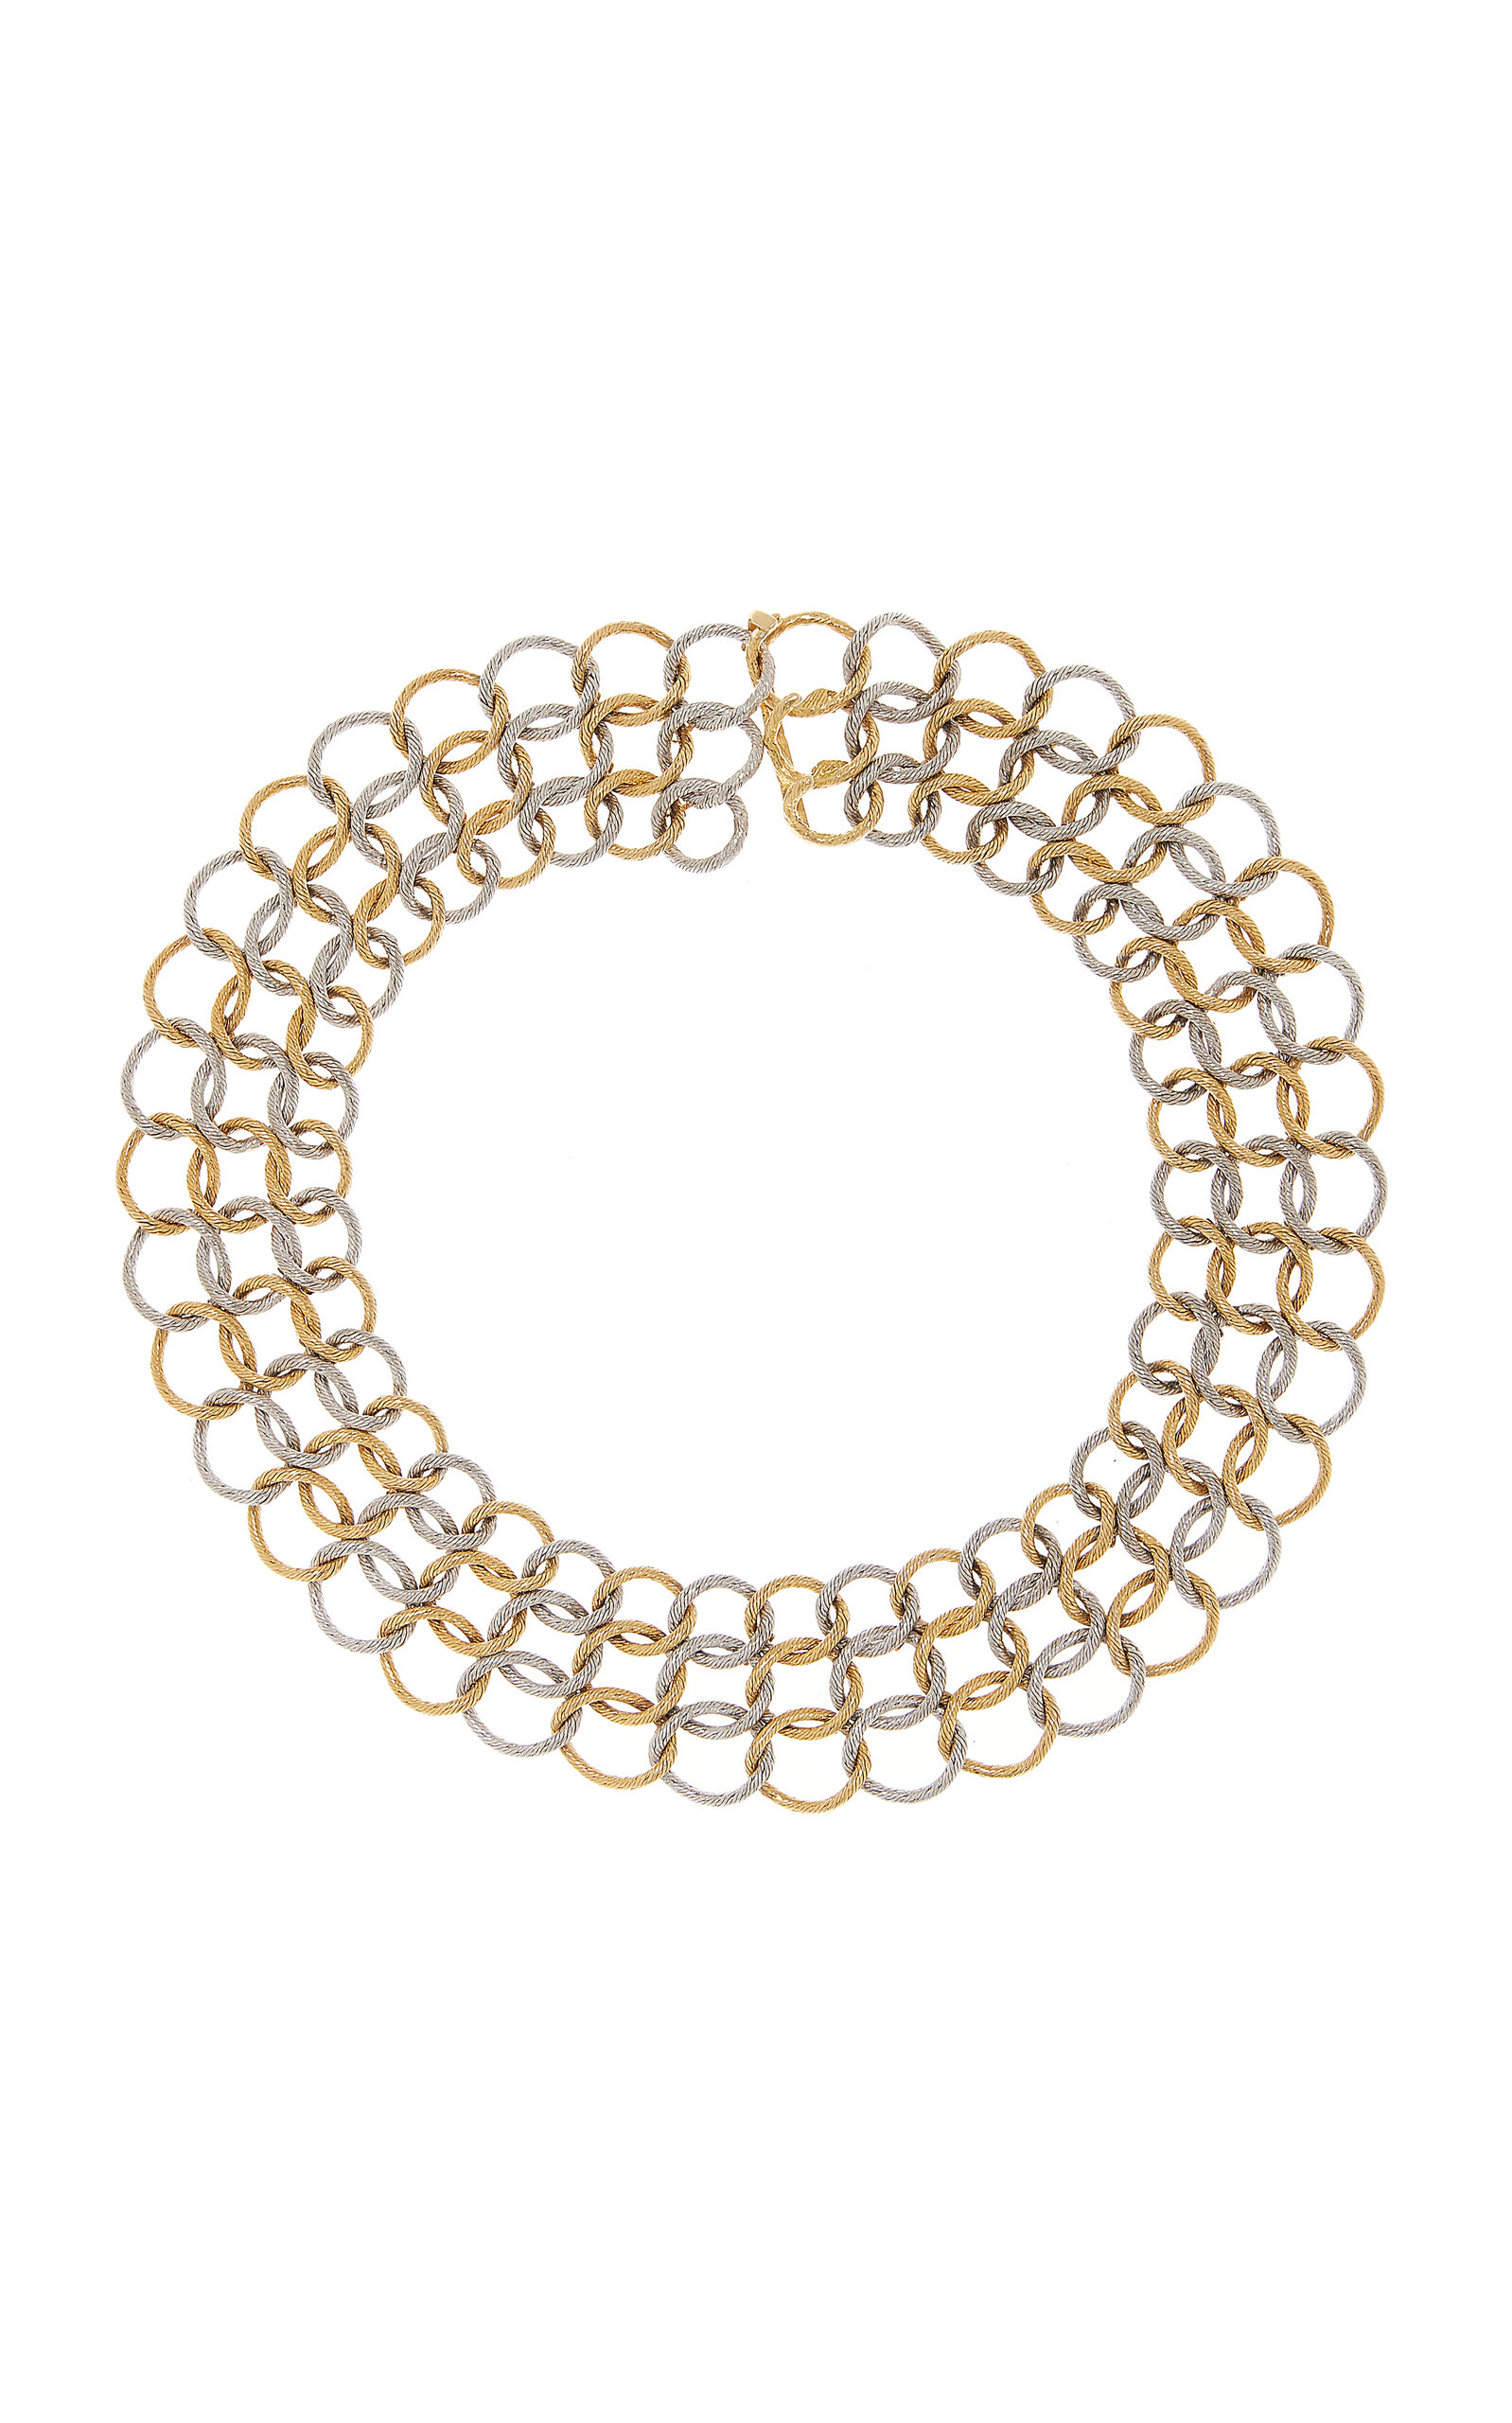 Two Tone Gold Collar Necklace; By Georges Lenfant